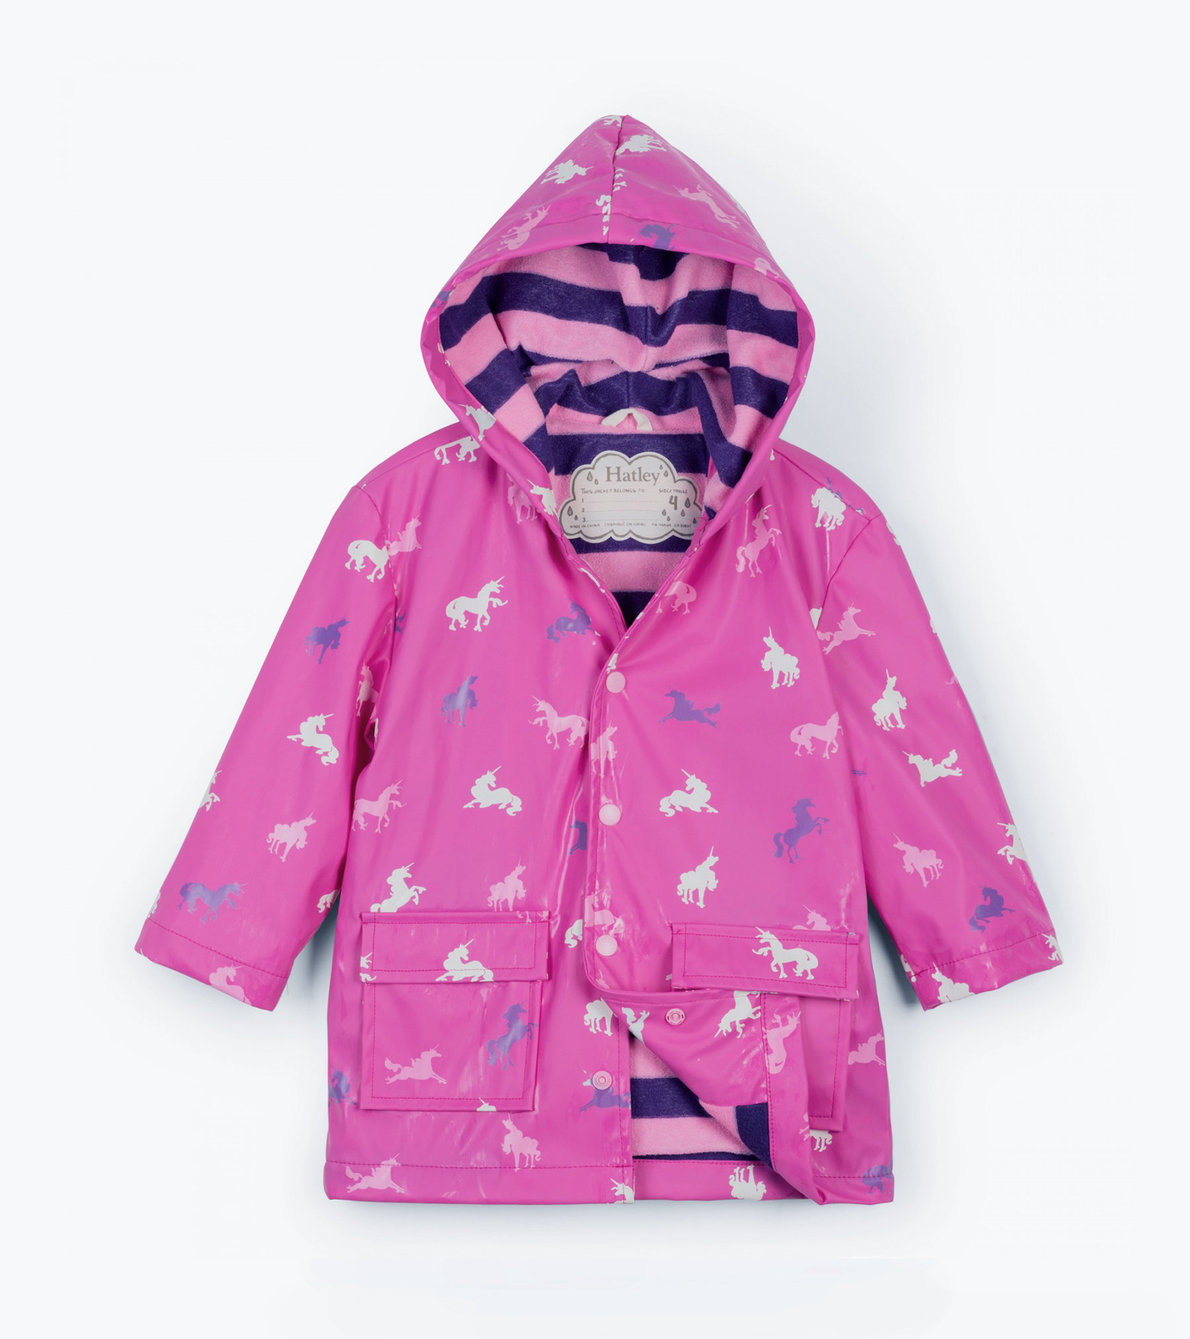 View larger image of Colour Changing Unicorn Silhouettes Raincoat